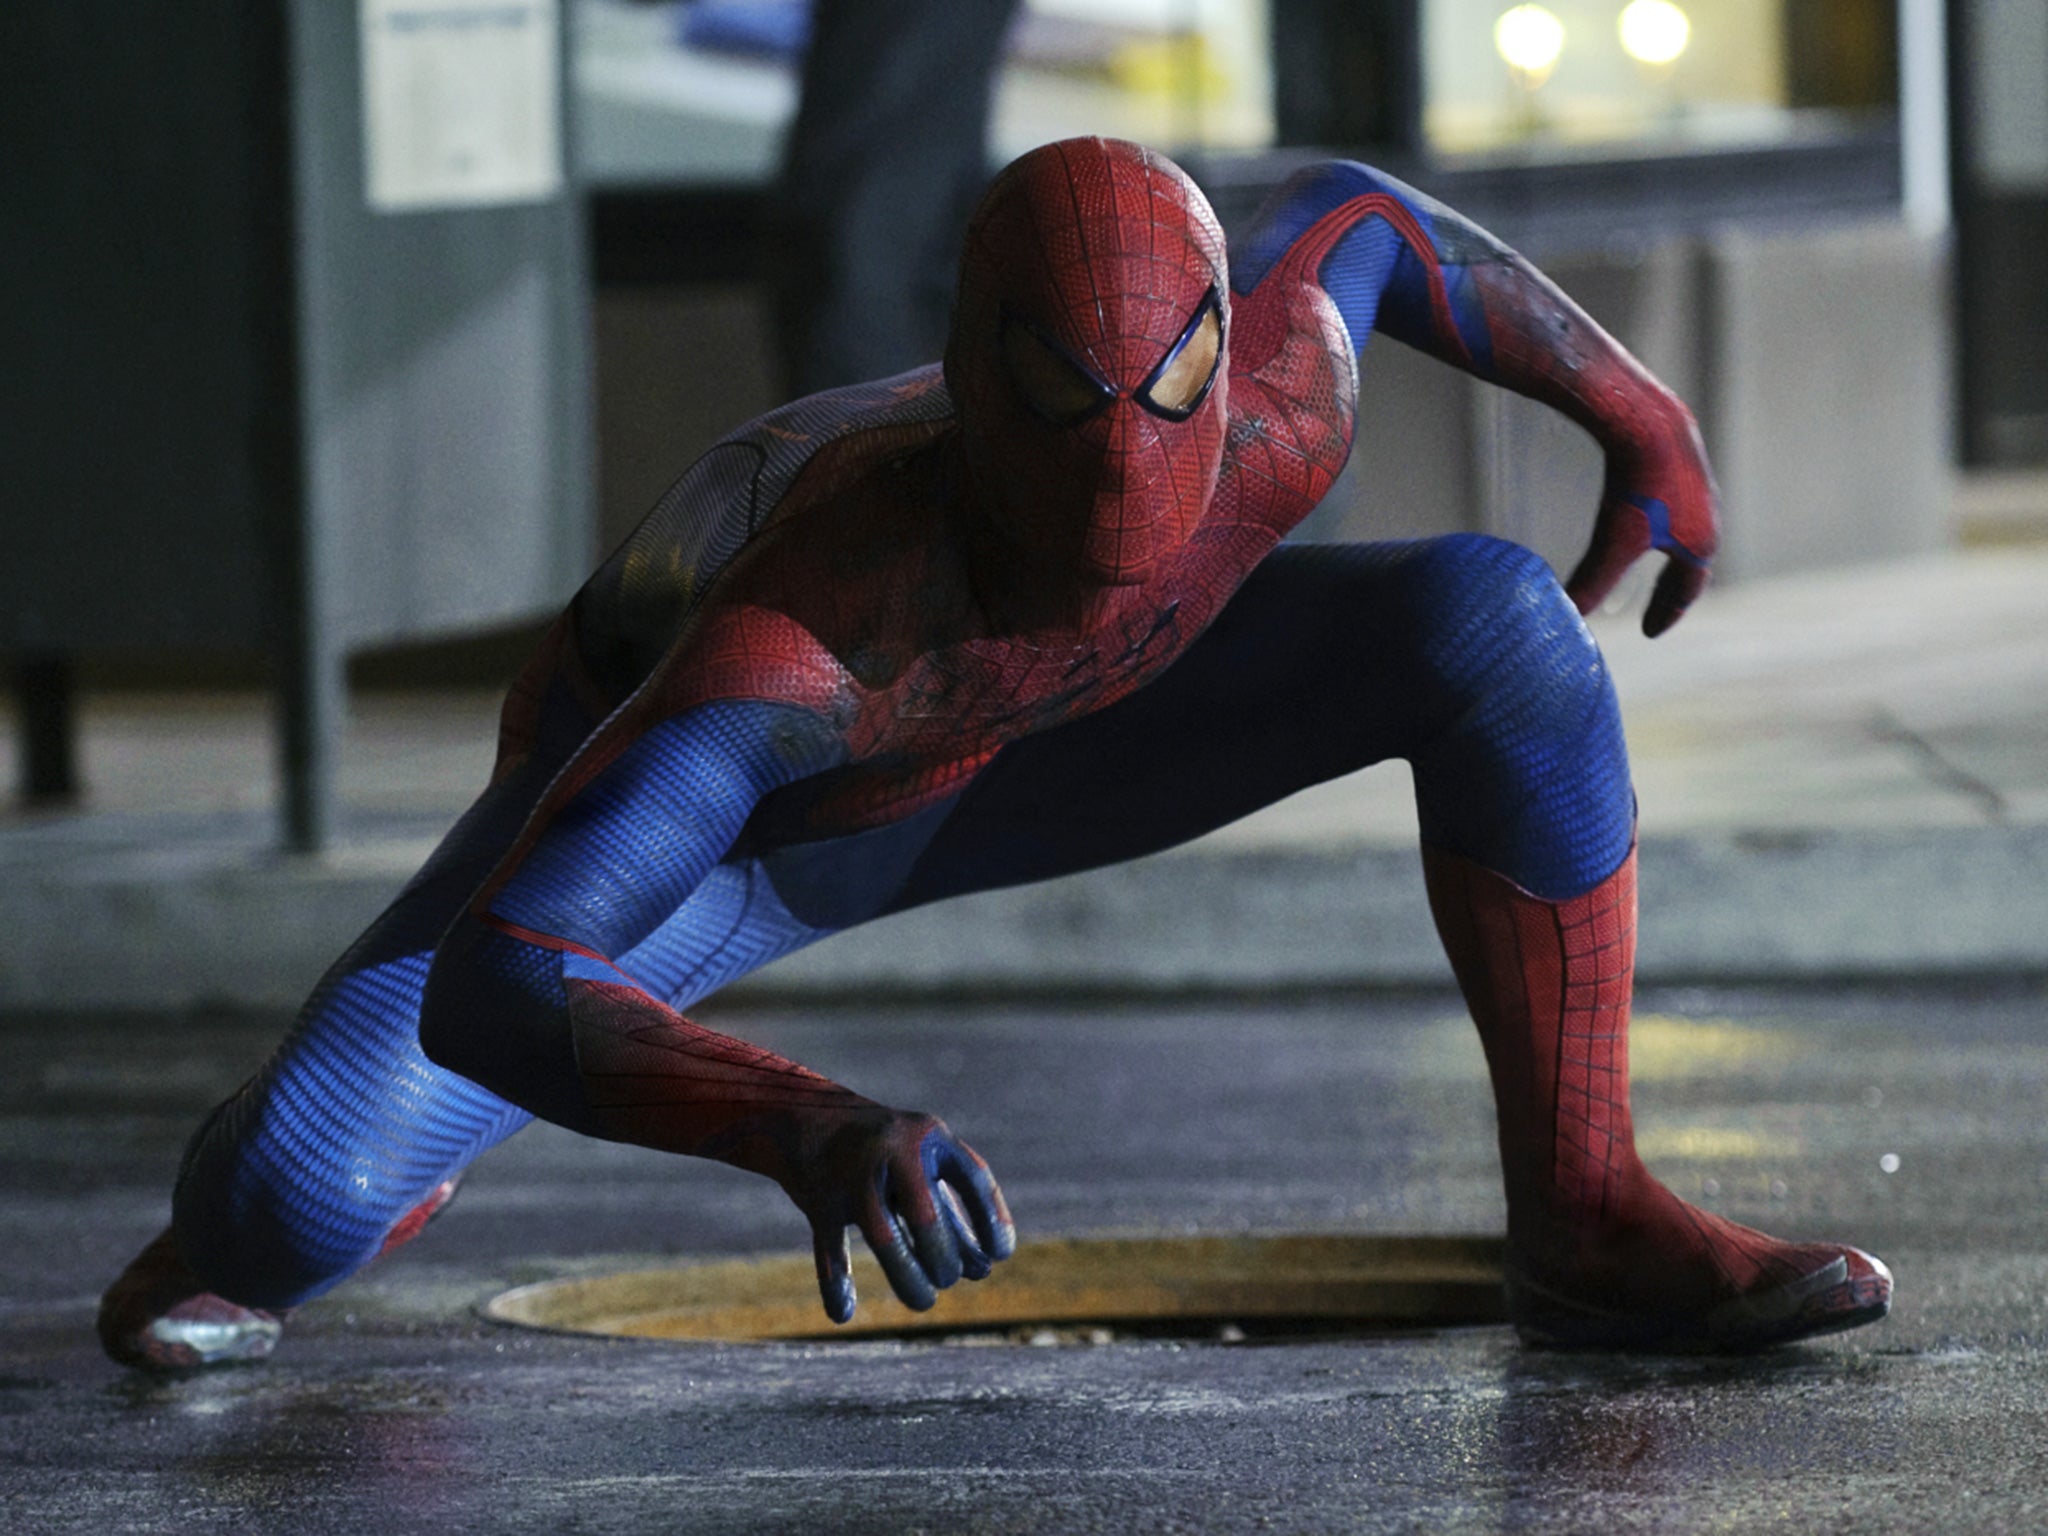 Robbers dressed as Spiderman and Santa Claus are reported to have stolen cigarettes in Australia